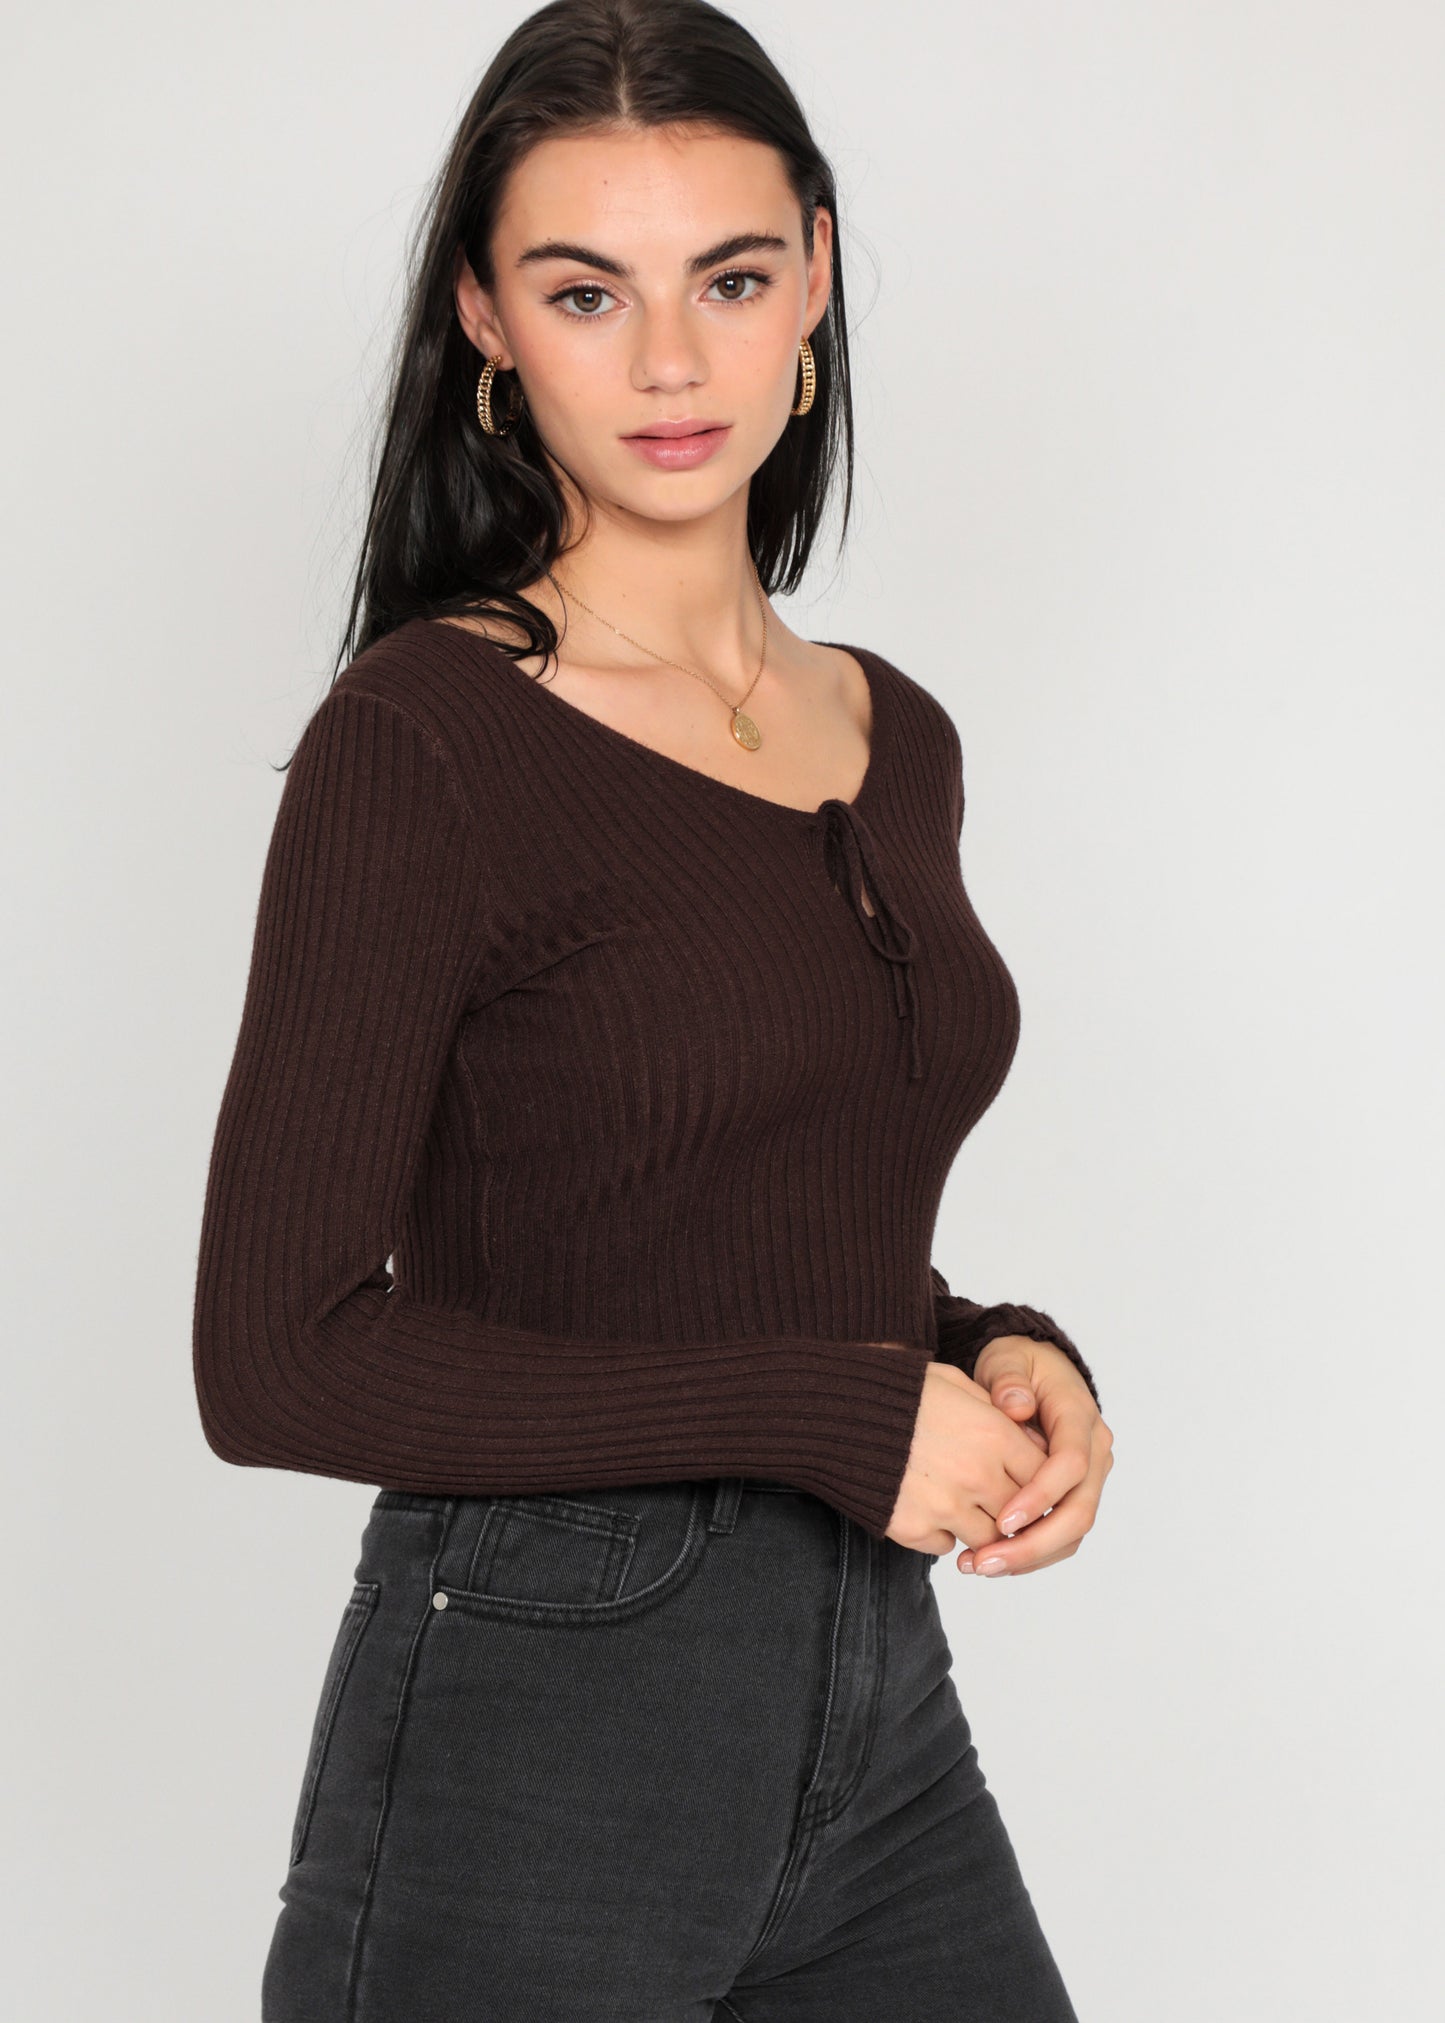 Jumper with cut out detail in brown